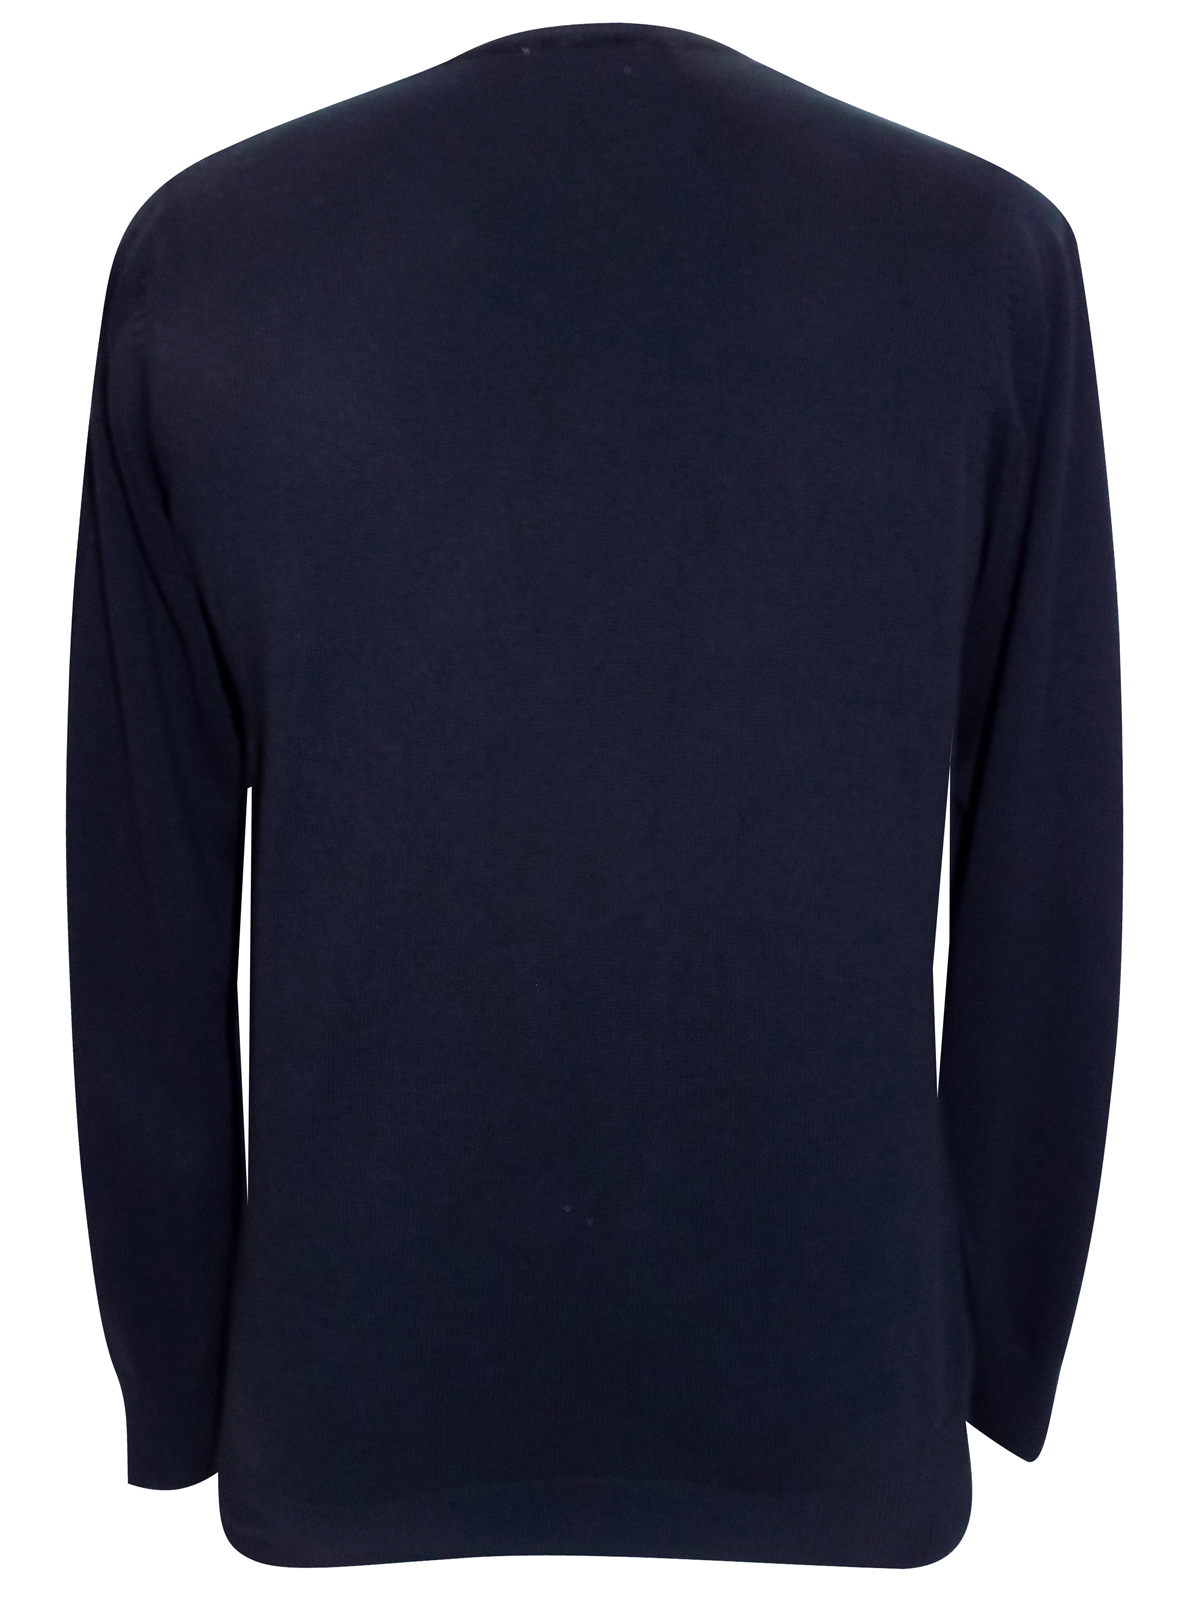 Marks and Spencer - - M&5 NAVY Pure Cotton Crew Neck Jumper - Size ...